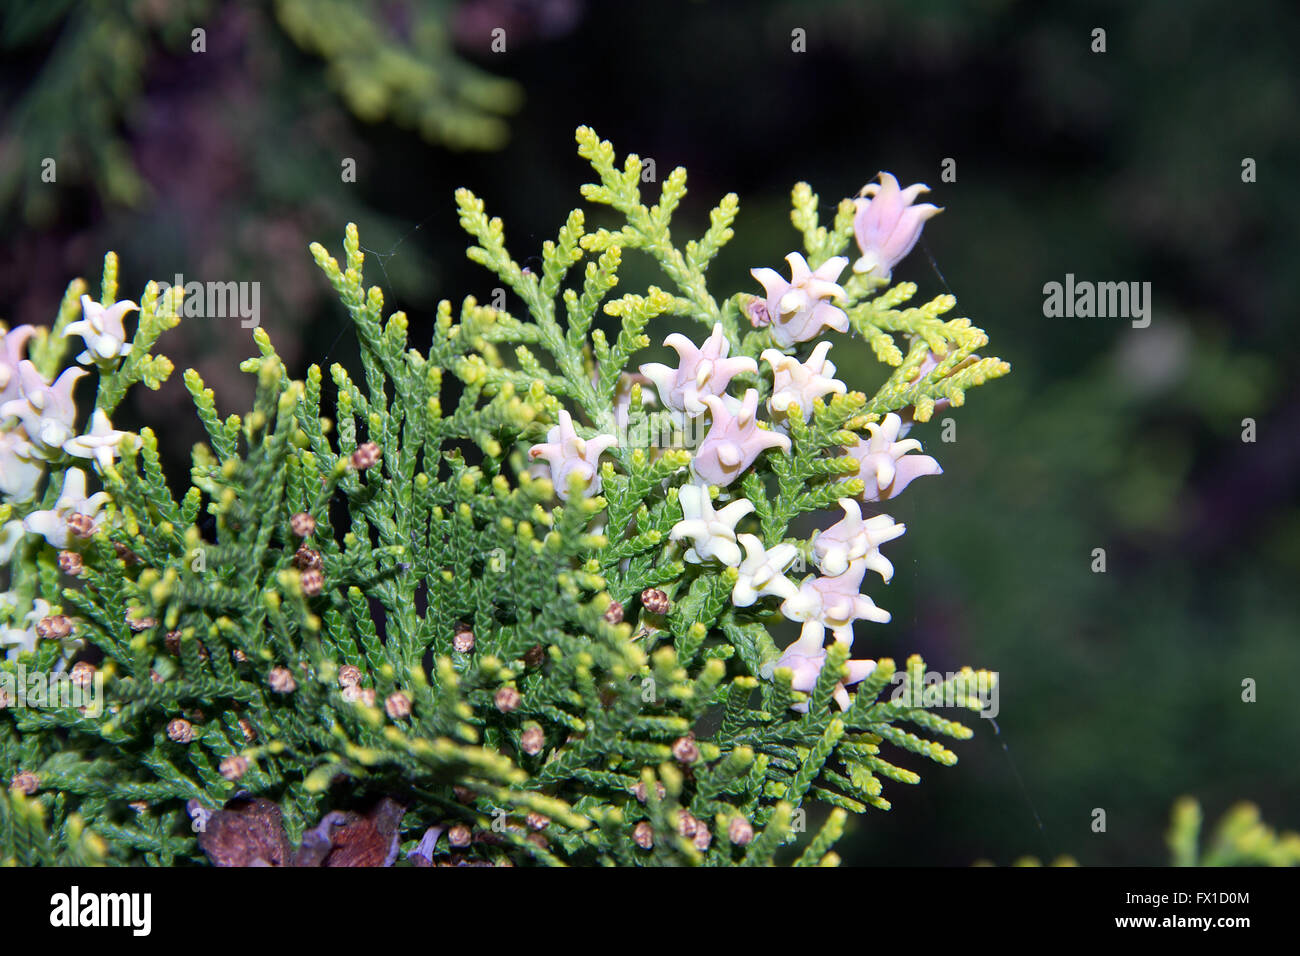 Serbia - White cedar (Thuja occidentalis) branch with pinecone offshoots Stock Photo